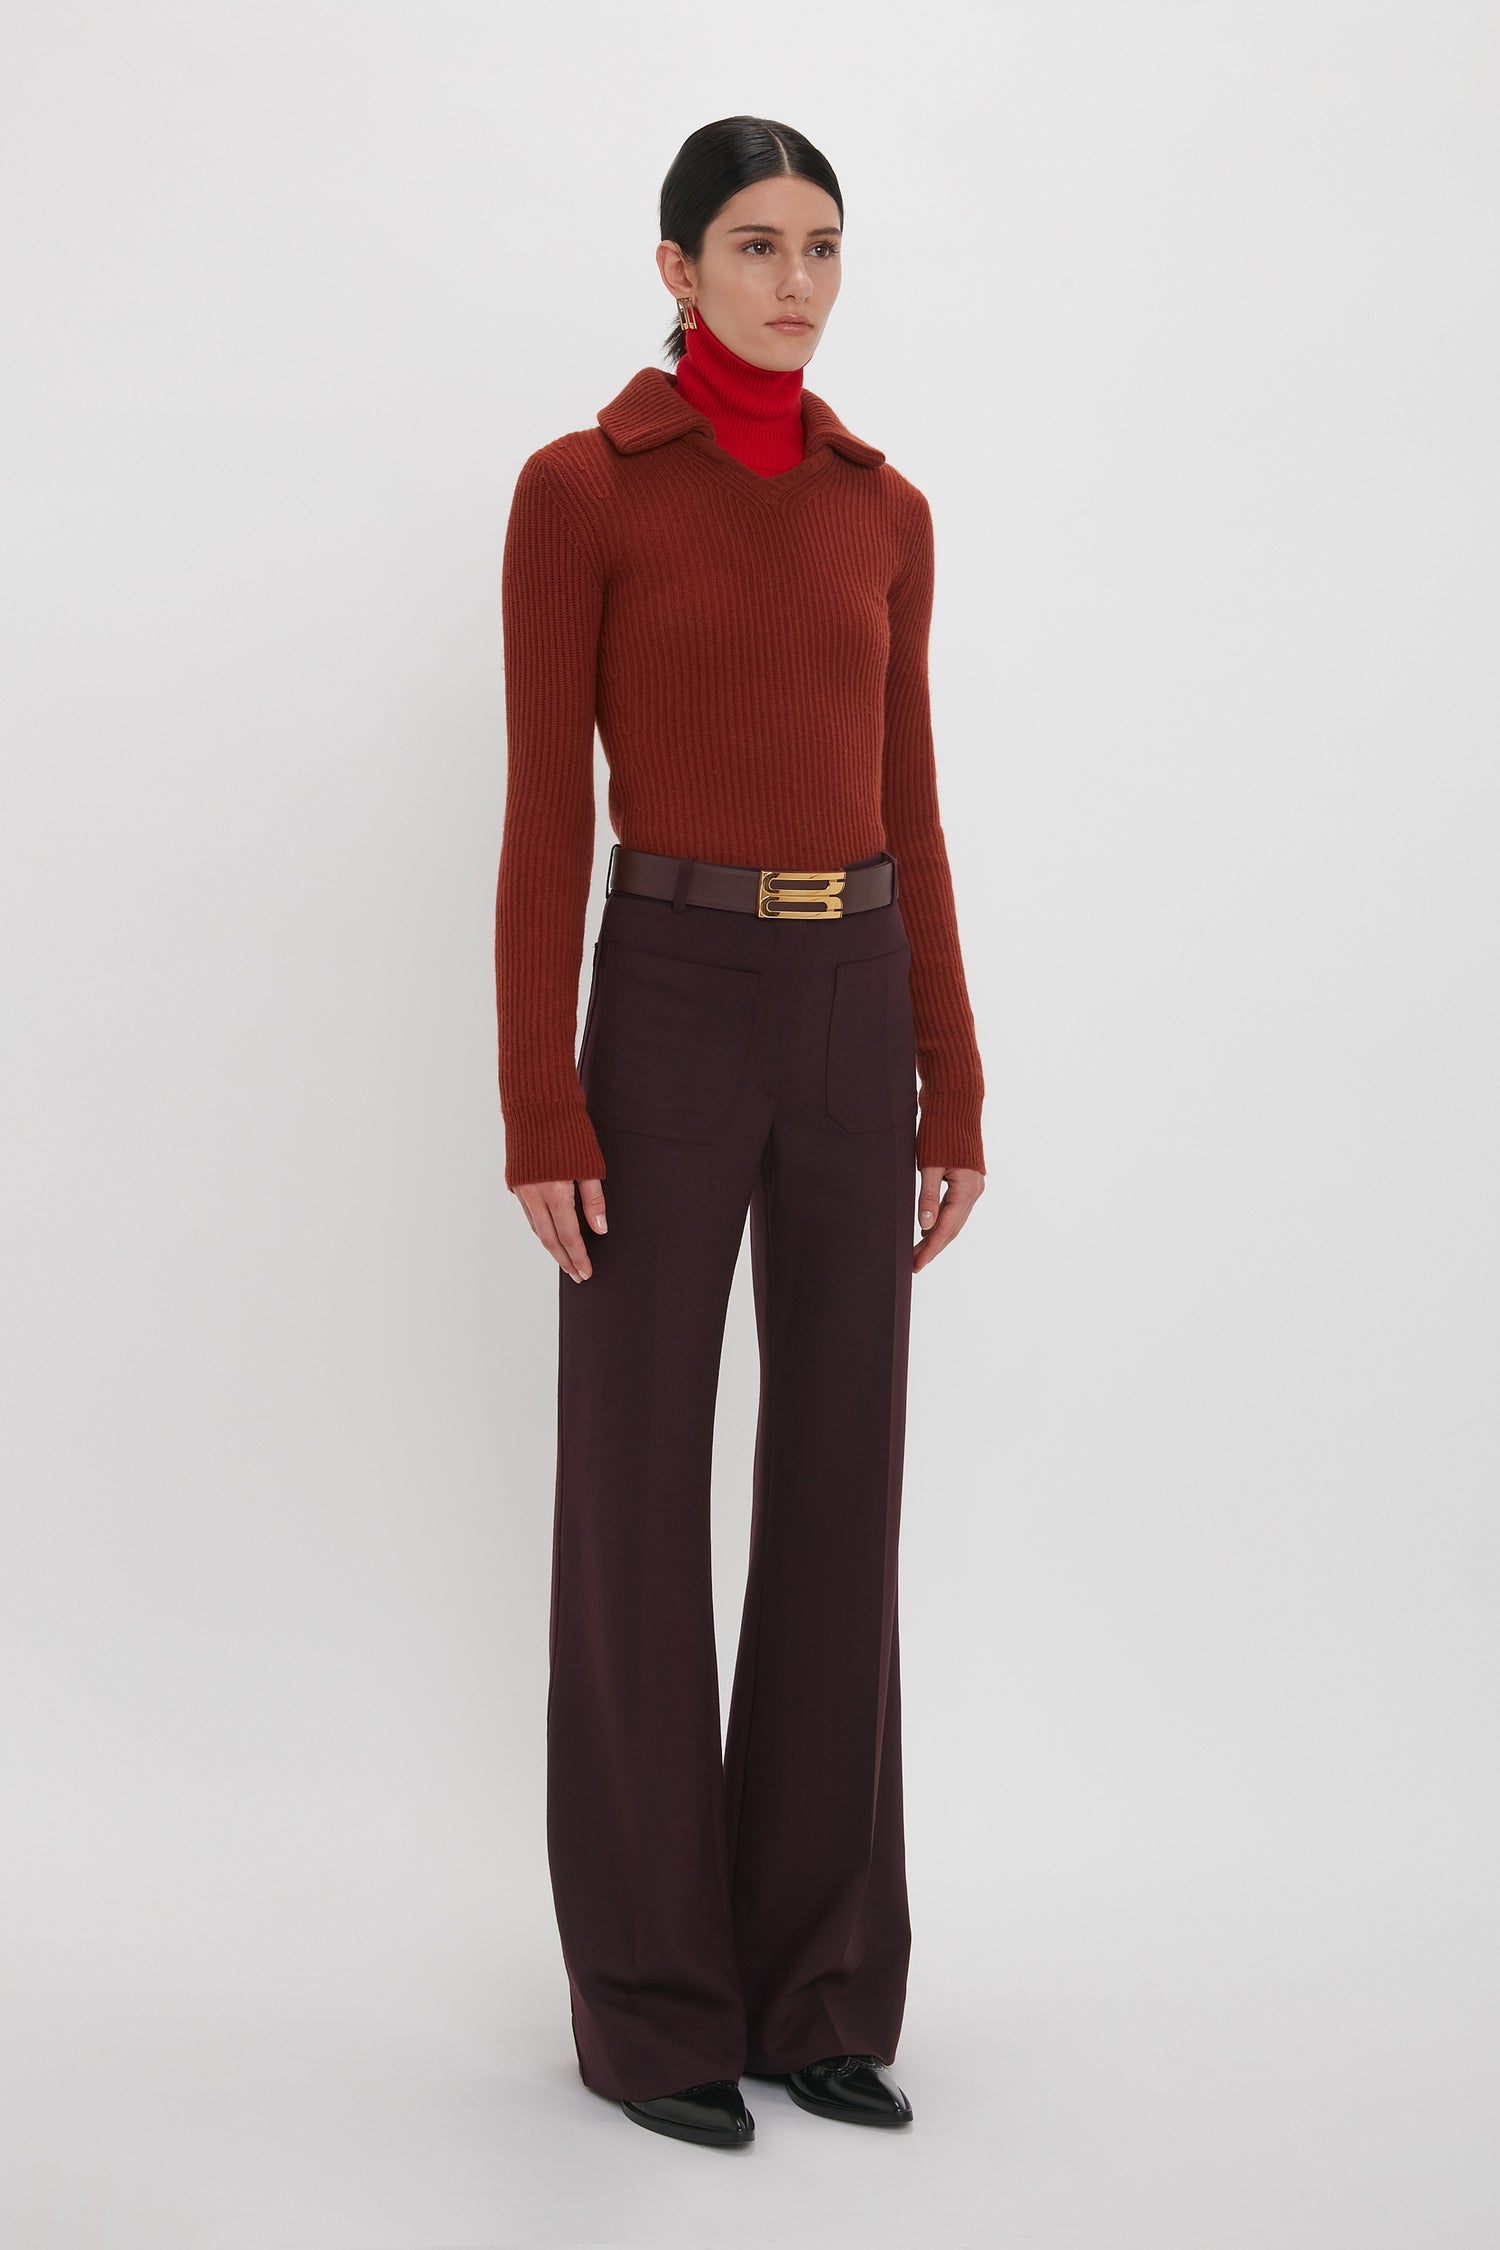 A person with dark hair in a low ponytail wears a Victoria Beckham Double Collared Jumper In Russet, a red turtleneck, high-waisted maroon pants with a belt, and black shoes. They are standing against a plain white background.